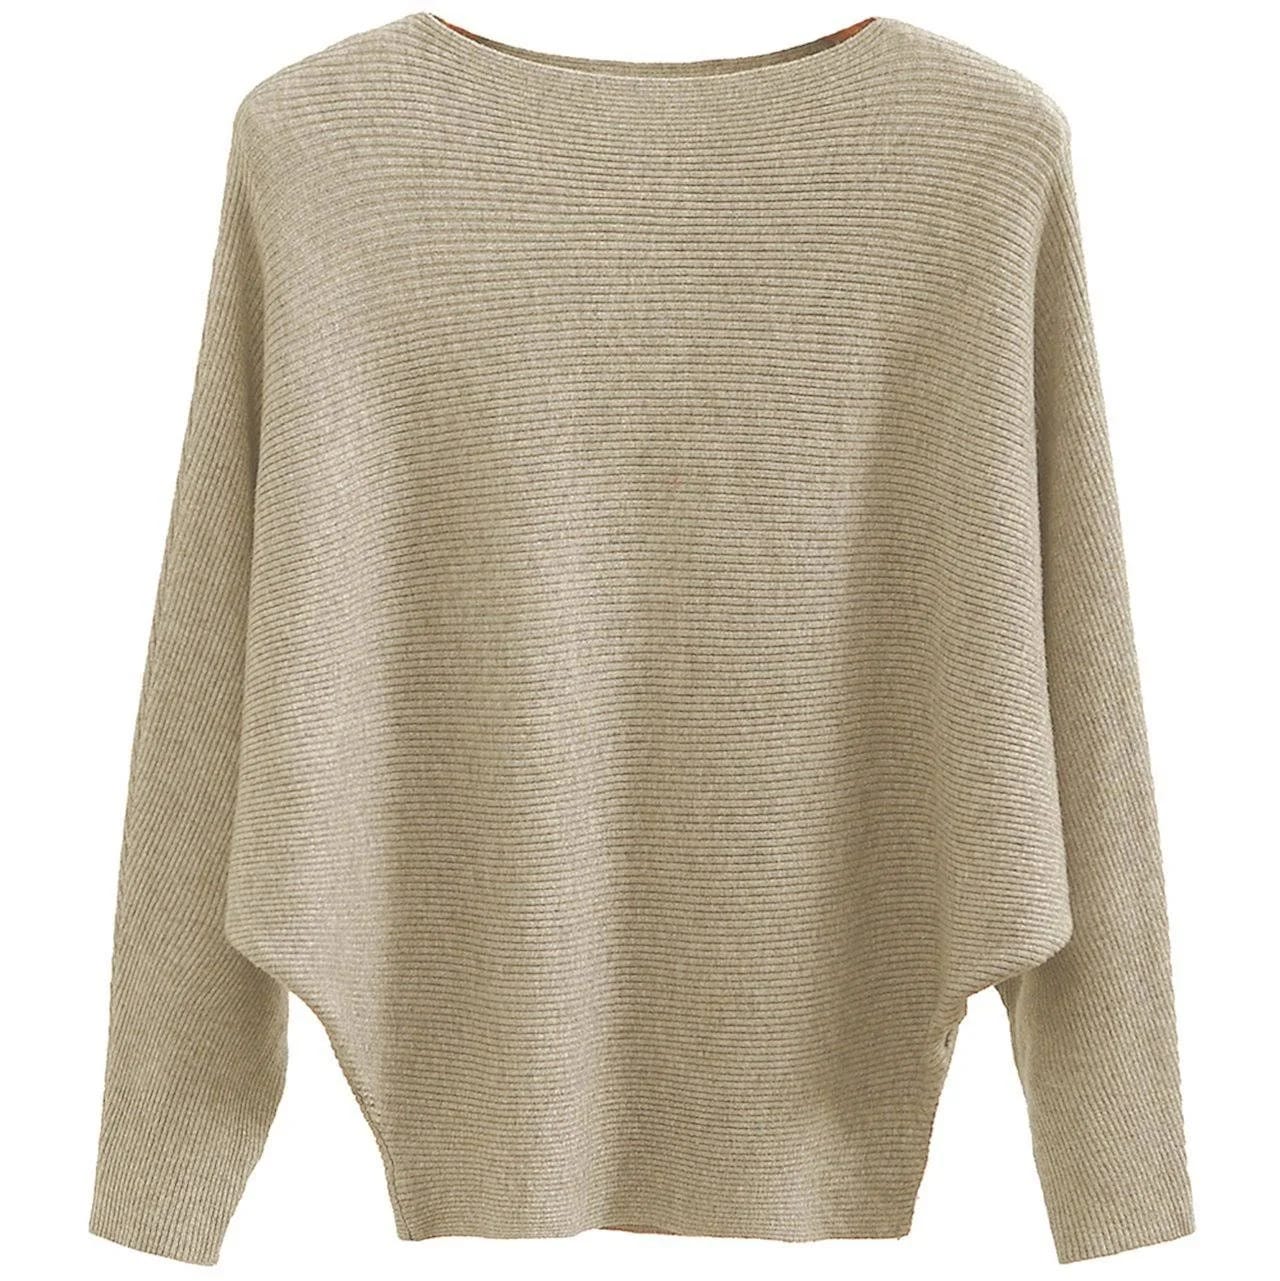 The Ultimate Soft and Comfortable Batwing Sleeve Sweater for Women | Image